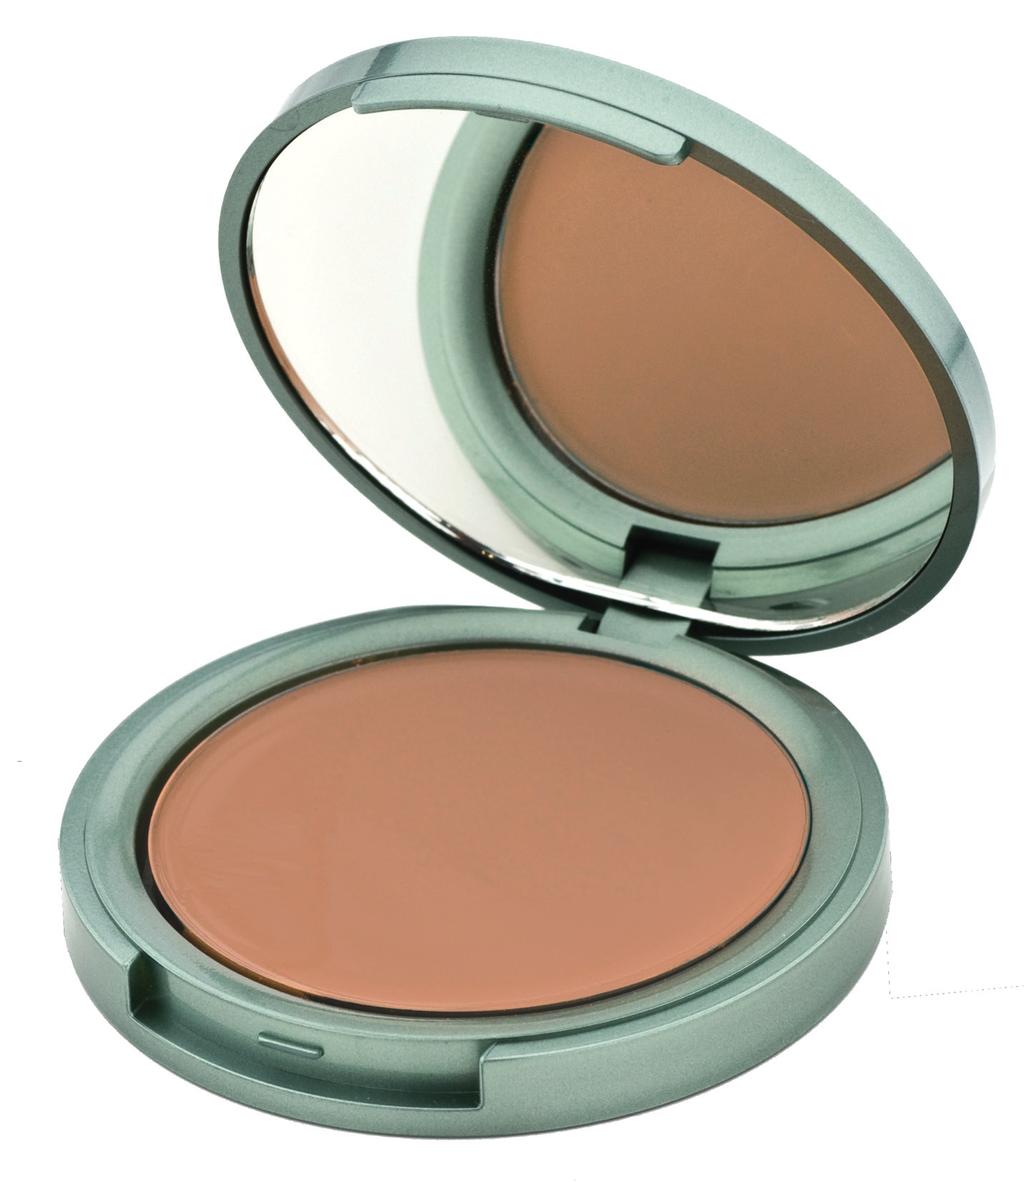 Sheer Finish TM Compact Foundation the ultimate in removing makeup... Camouflaging blemish-prone skin.